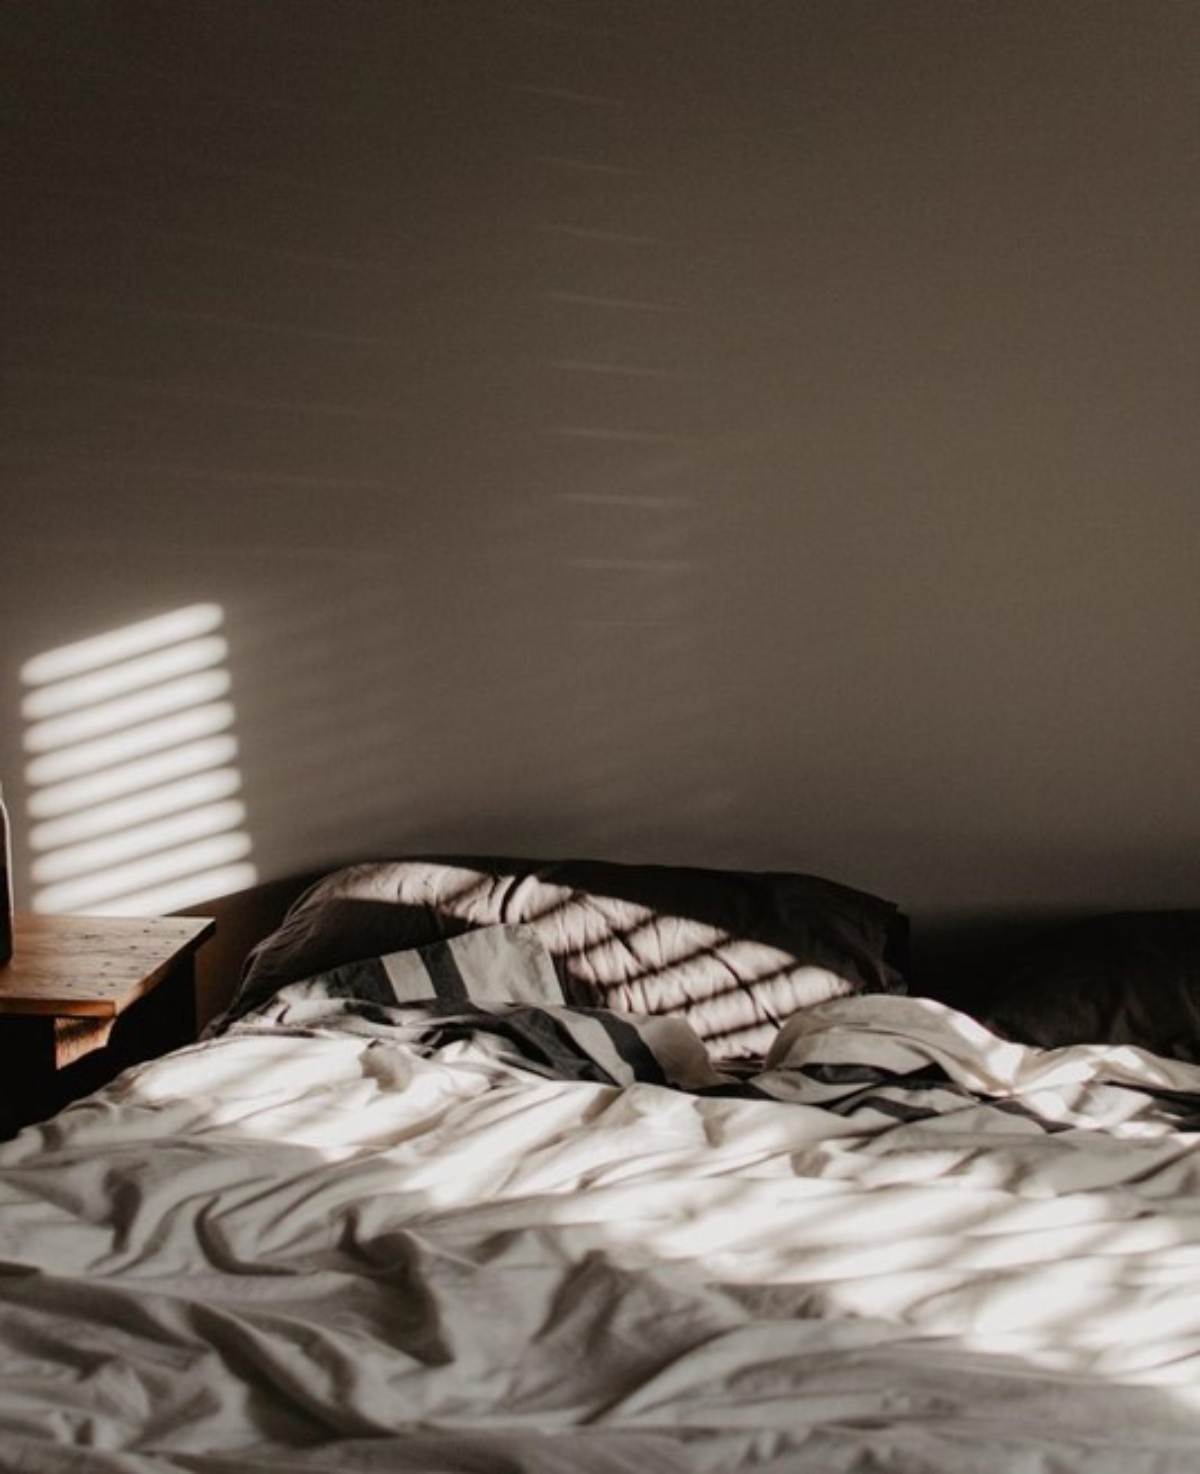 Get enough sunlight: How To Set Up a Great Winter Sleep Routine?